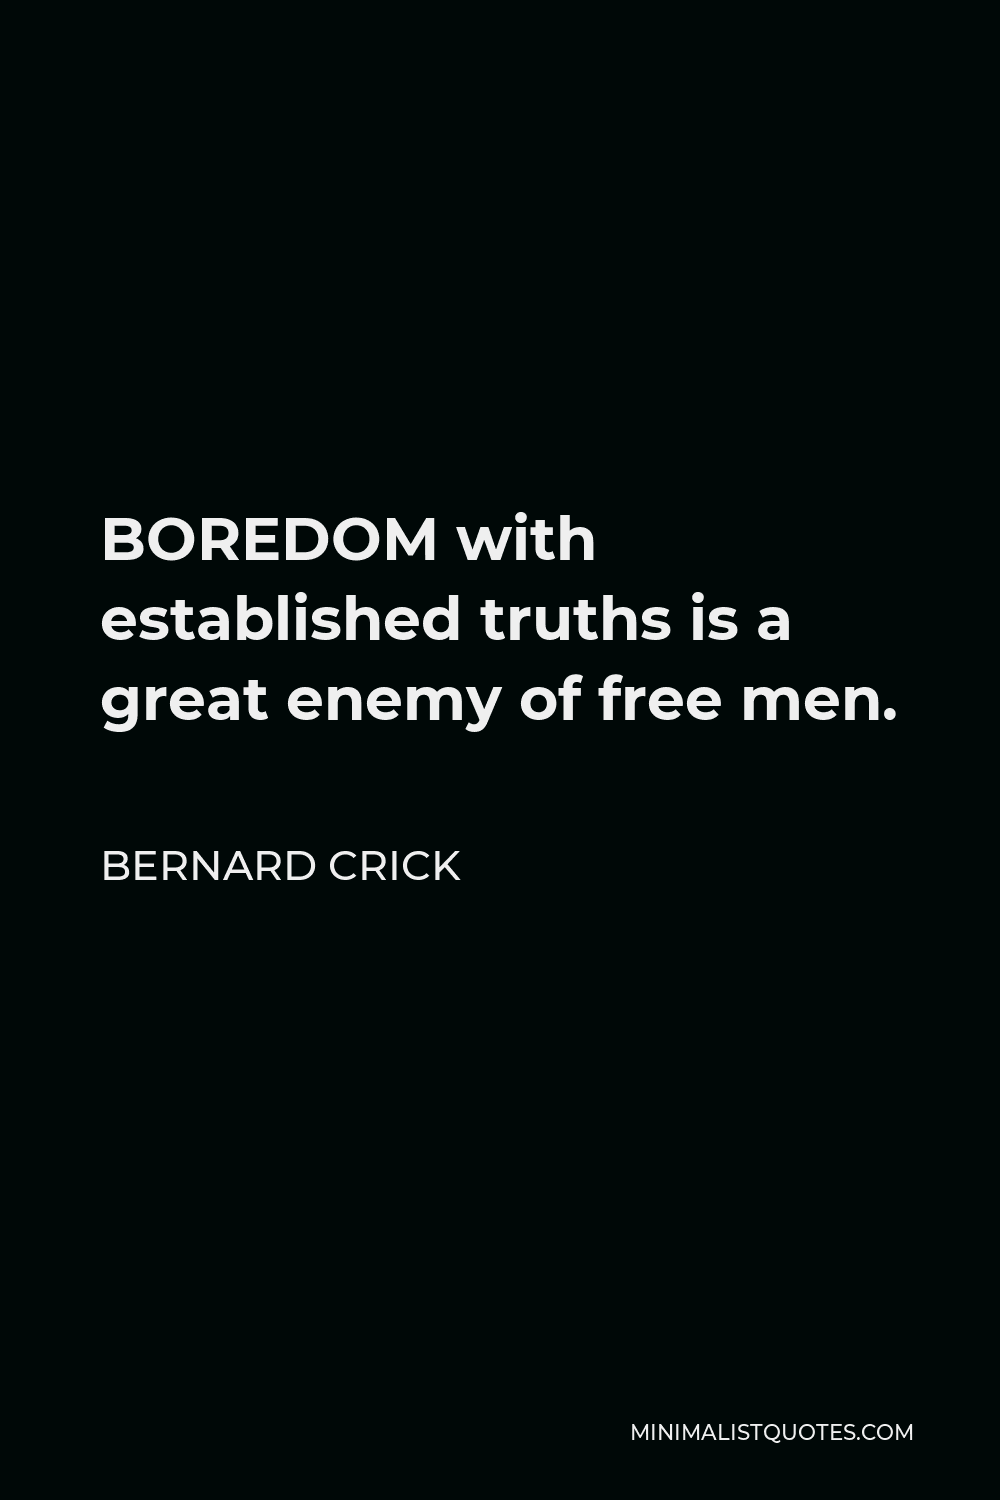 Bernard Crick Quote - BOREDOM with established truths is a great enemy of free men.